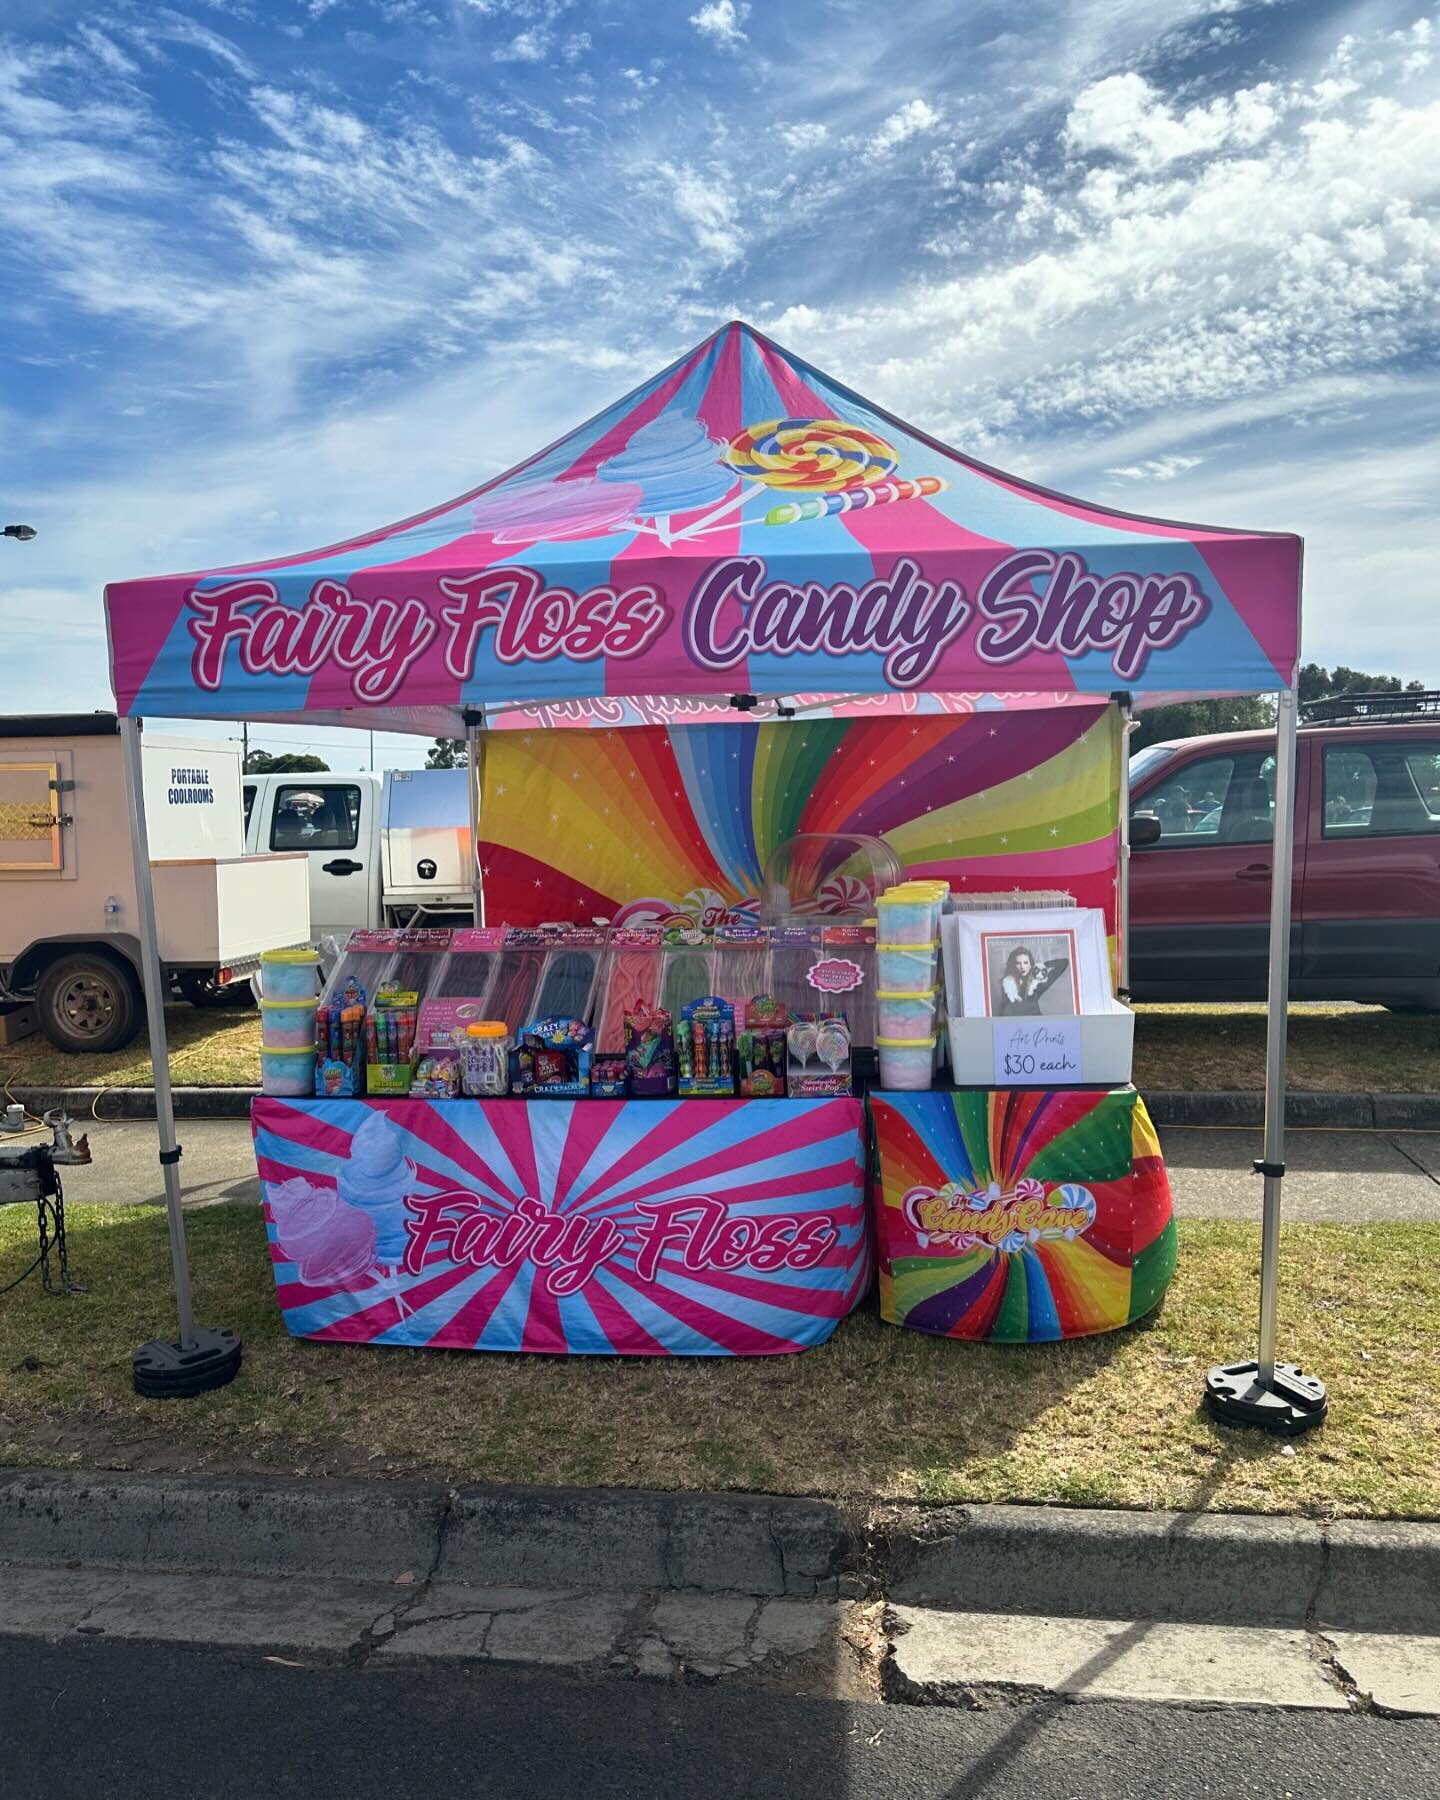 We&rsquo;re trading at the Somerville Family Day today. #somerville #somervillefamilyday #candyshop #fairyfloss #melbourneevents #foryou #longweekend